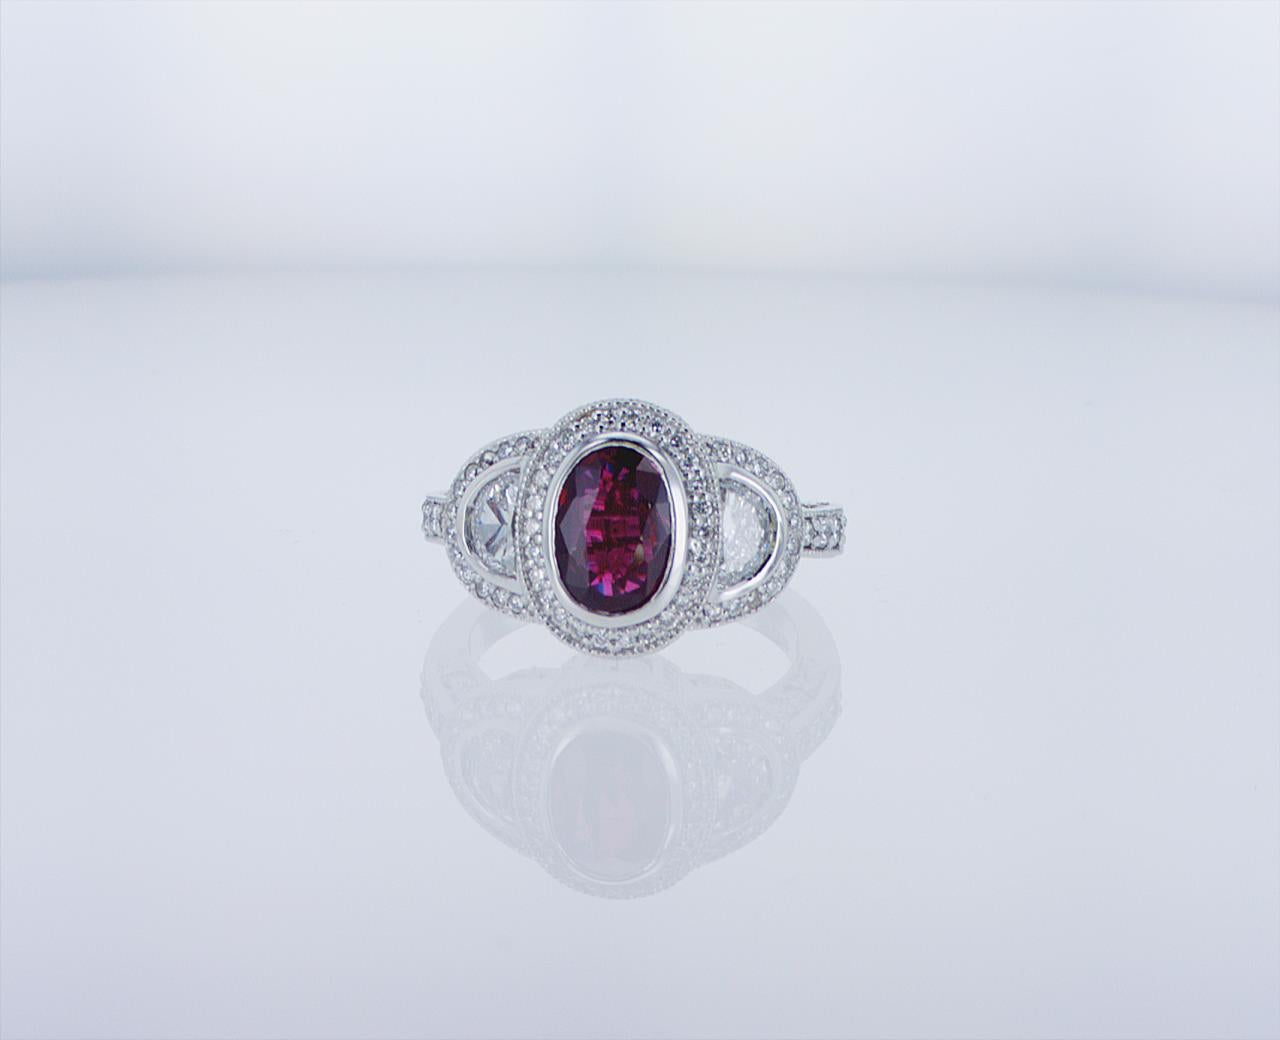 Oval Ruby Cocktail Ring with Half Moon Diamond Accents